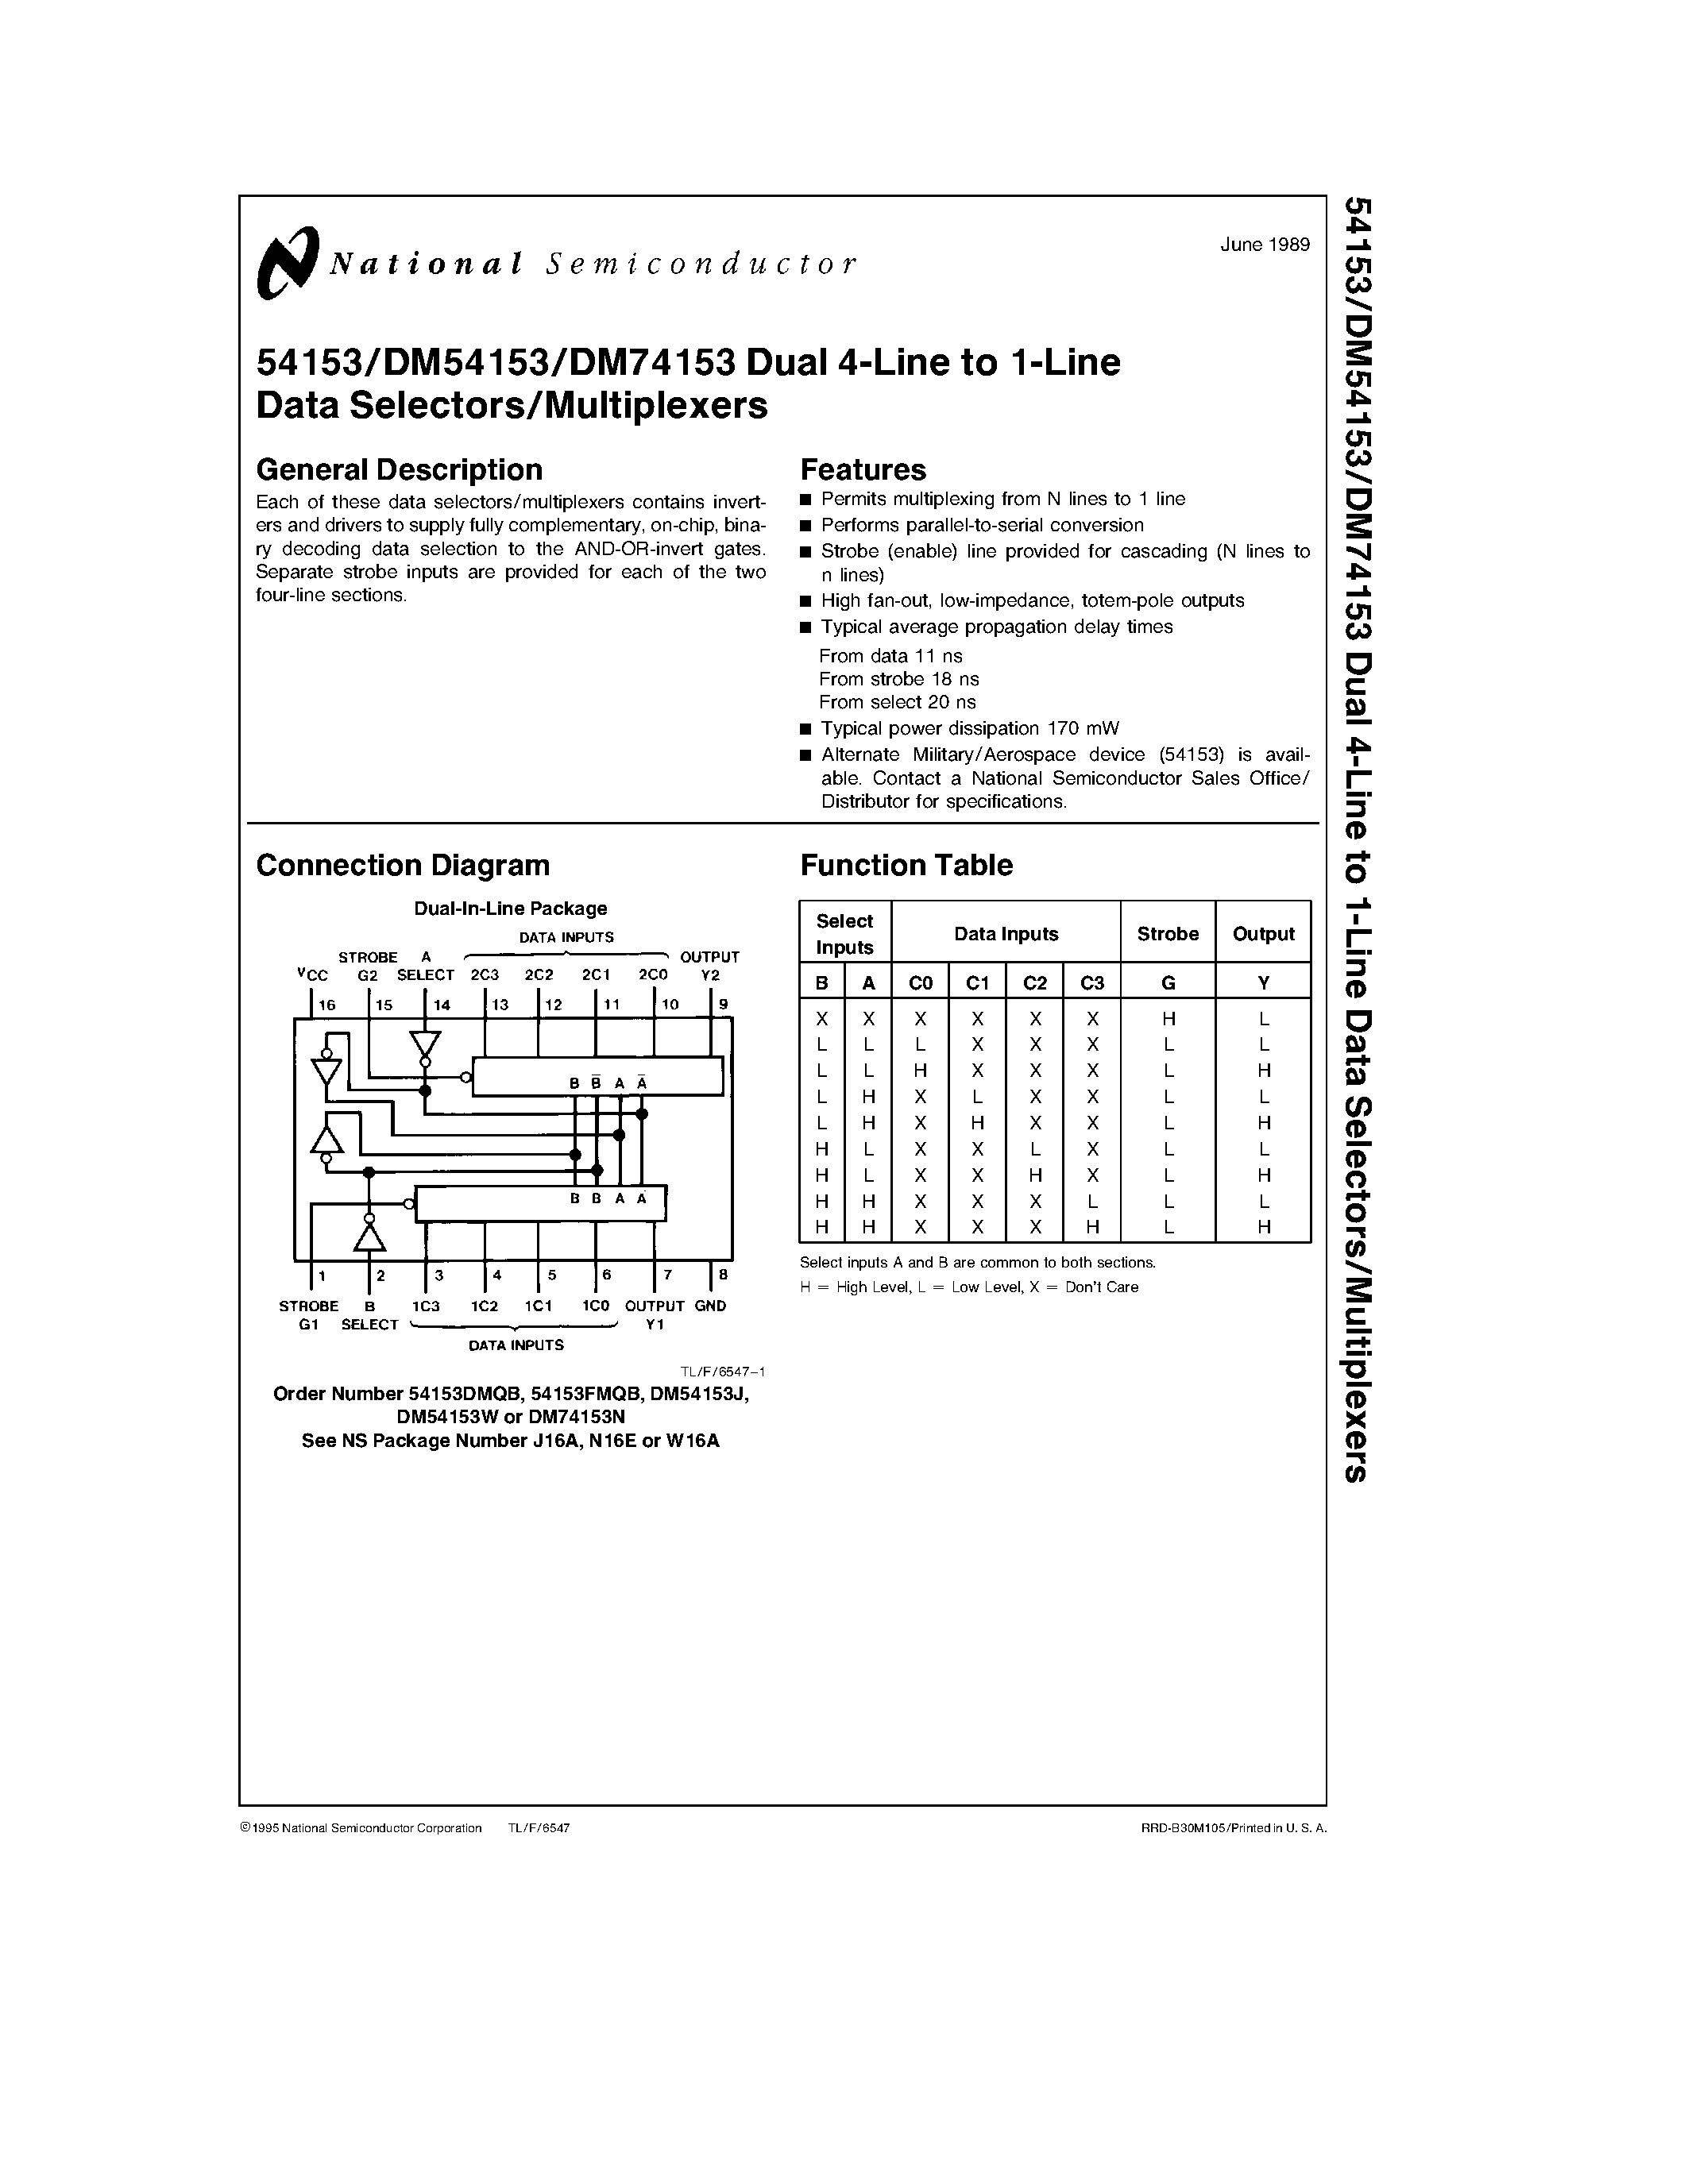 Datasheet 54153 - Dual 4-Line to 1-Line Data Selectors/Multiplexers page 1